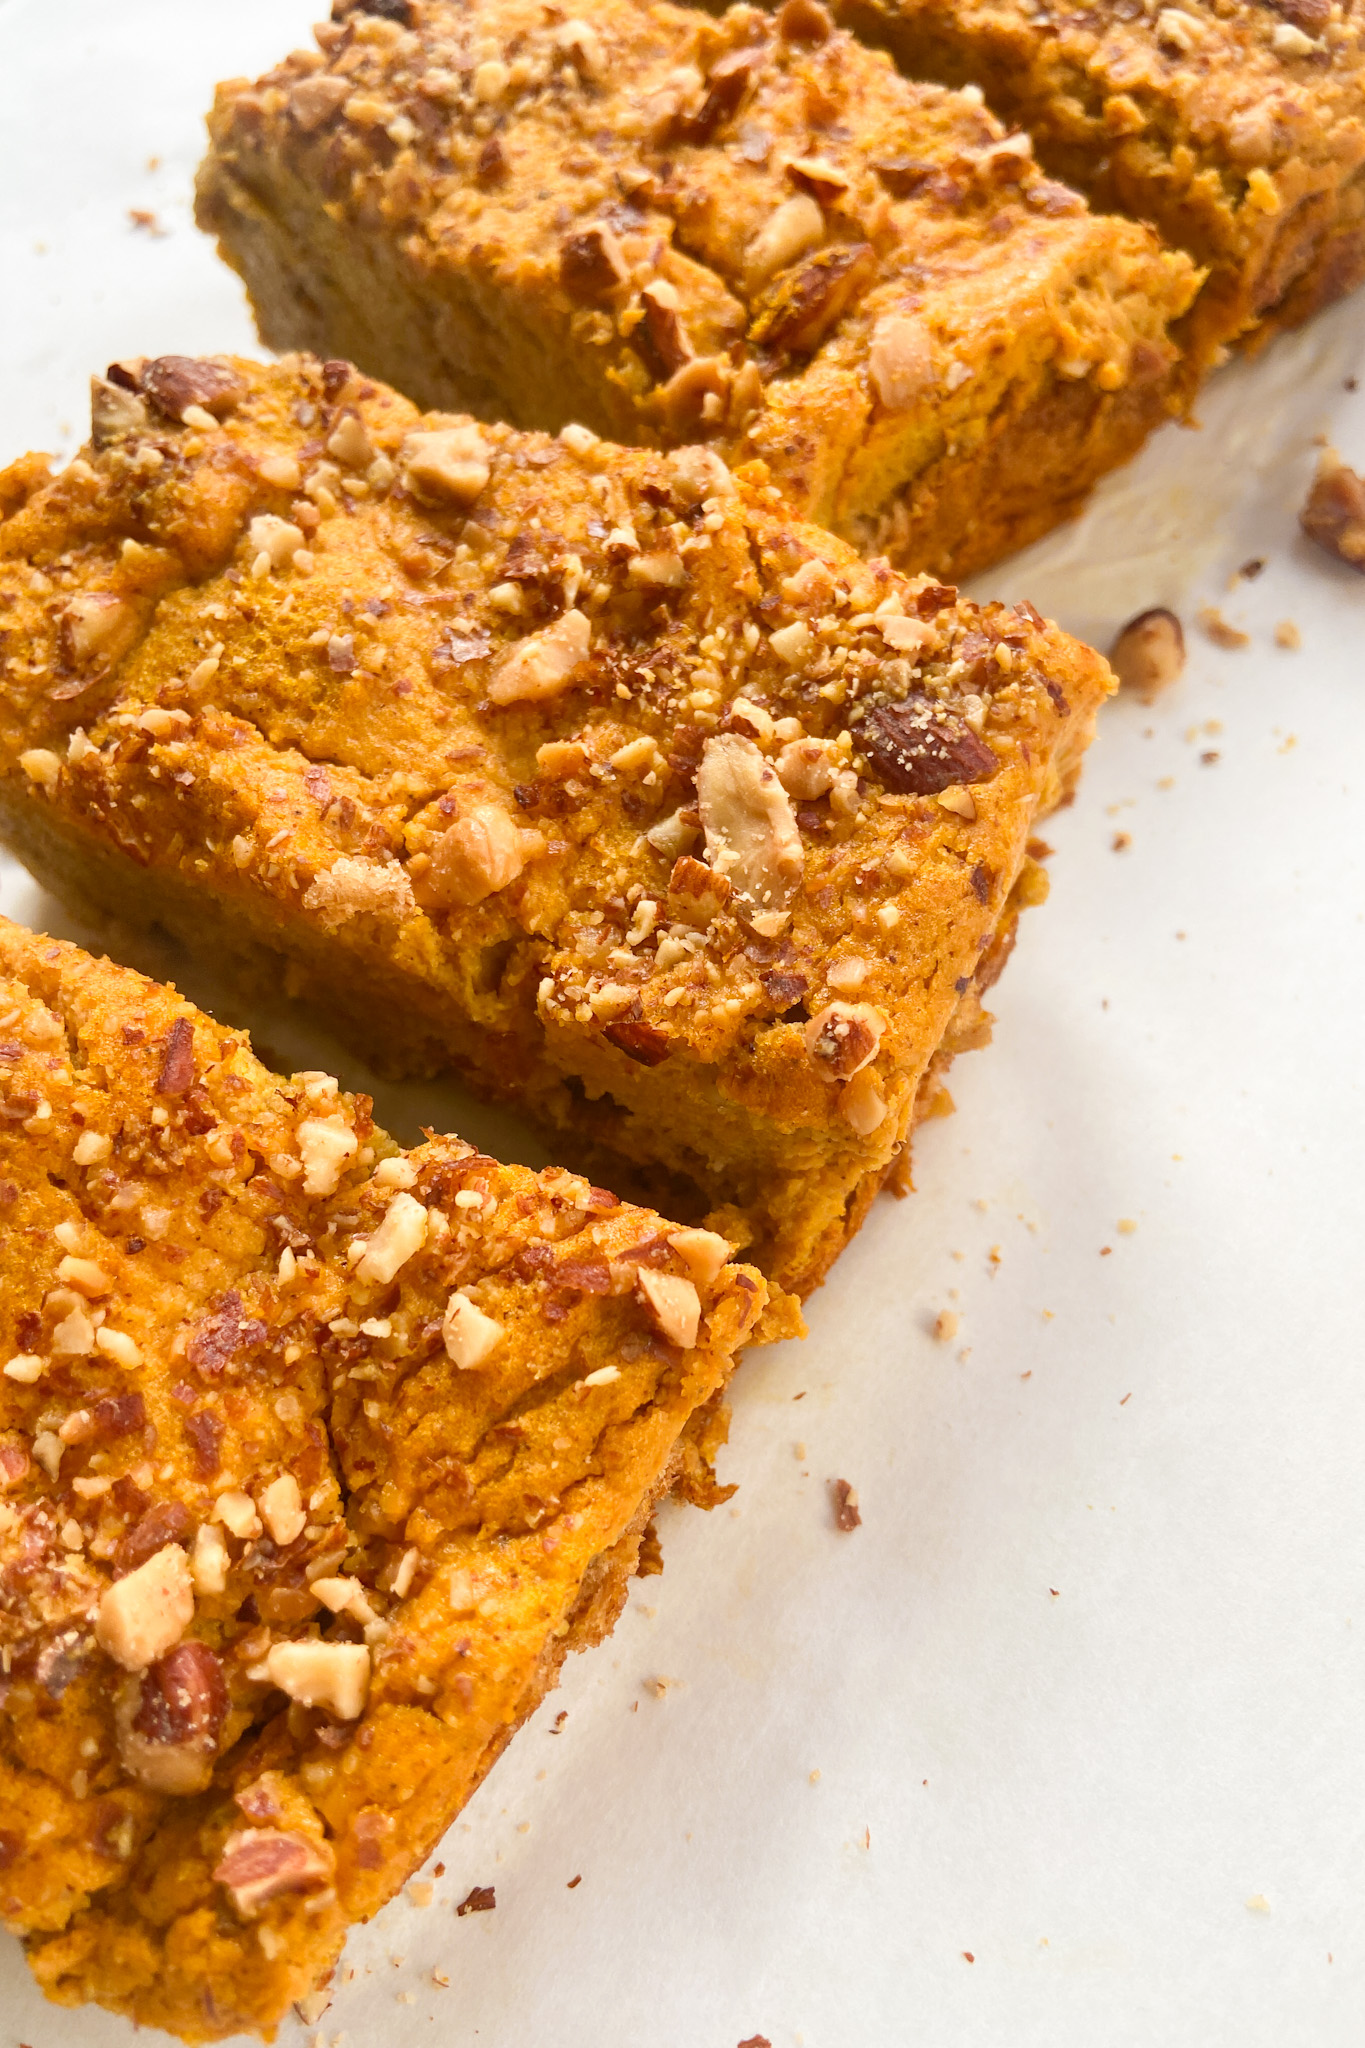 Pumpkin French toast bake sliced into pieces